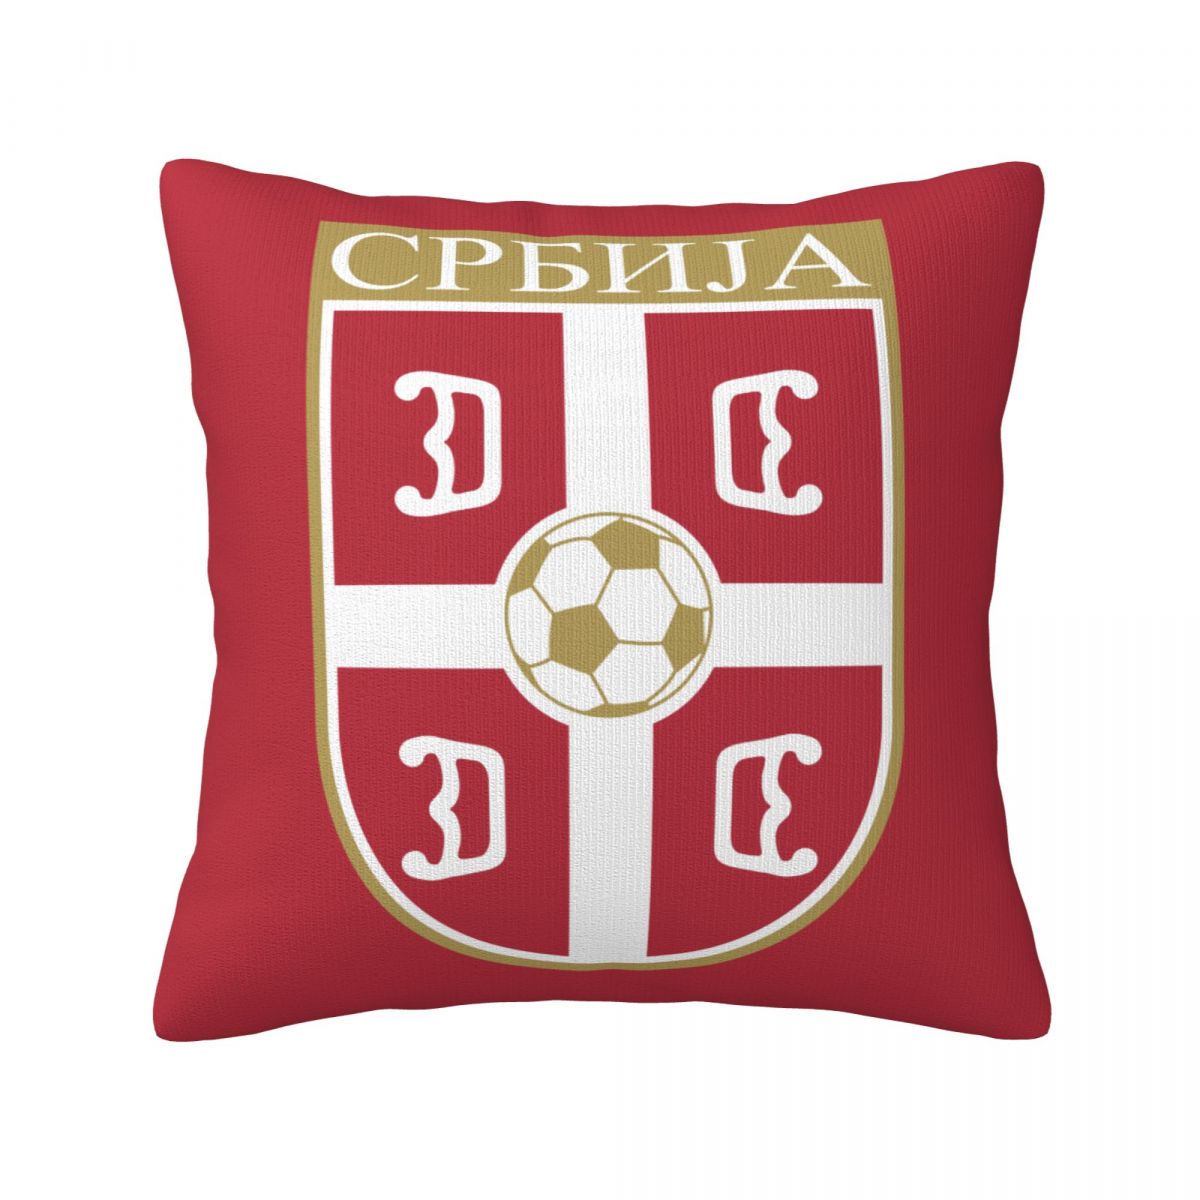 Serbia National Football Team Pillow Covers 18x18 Inch